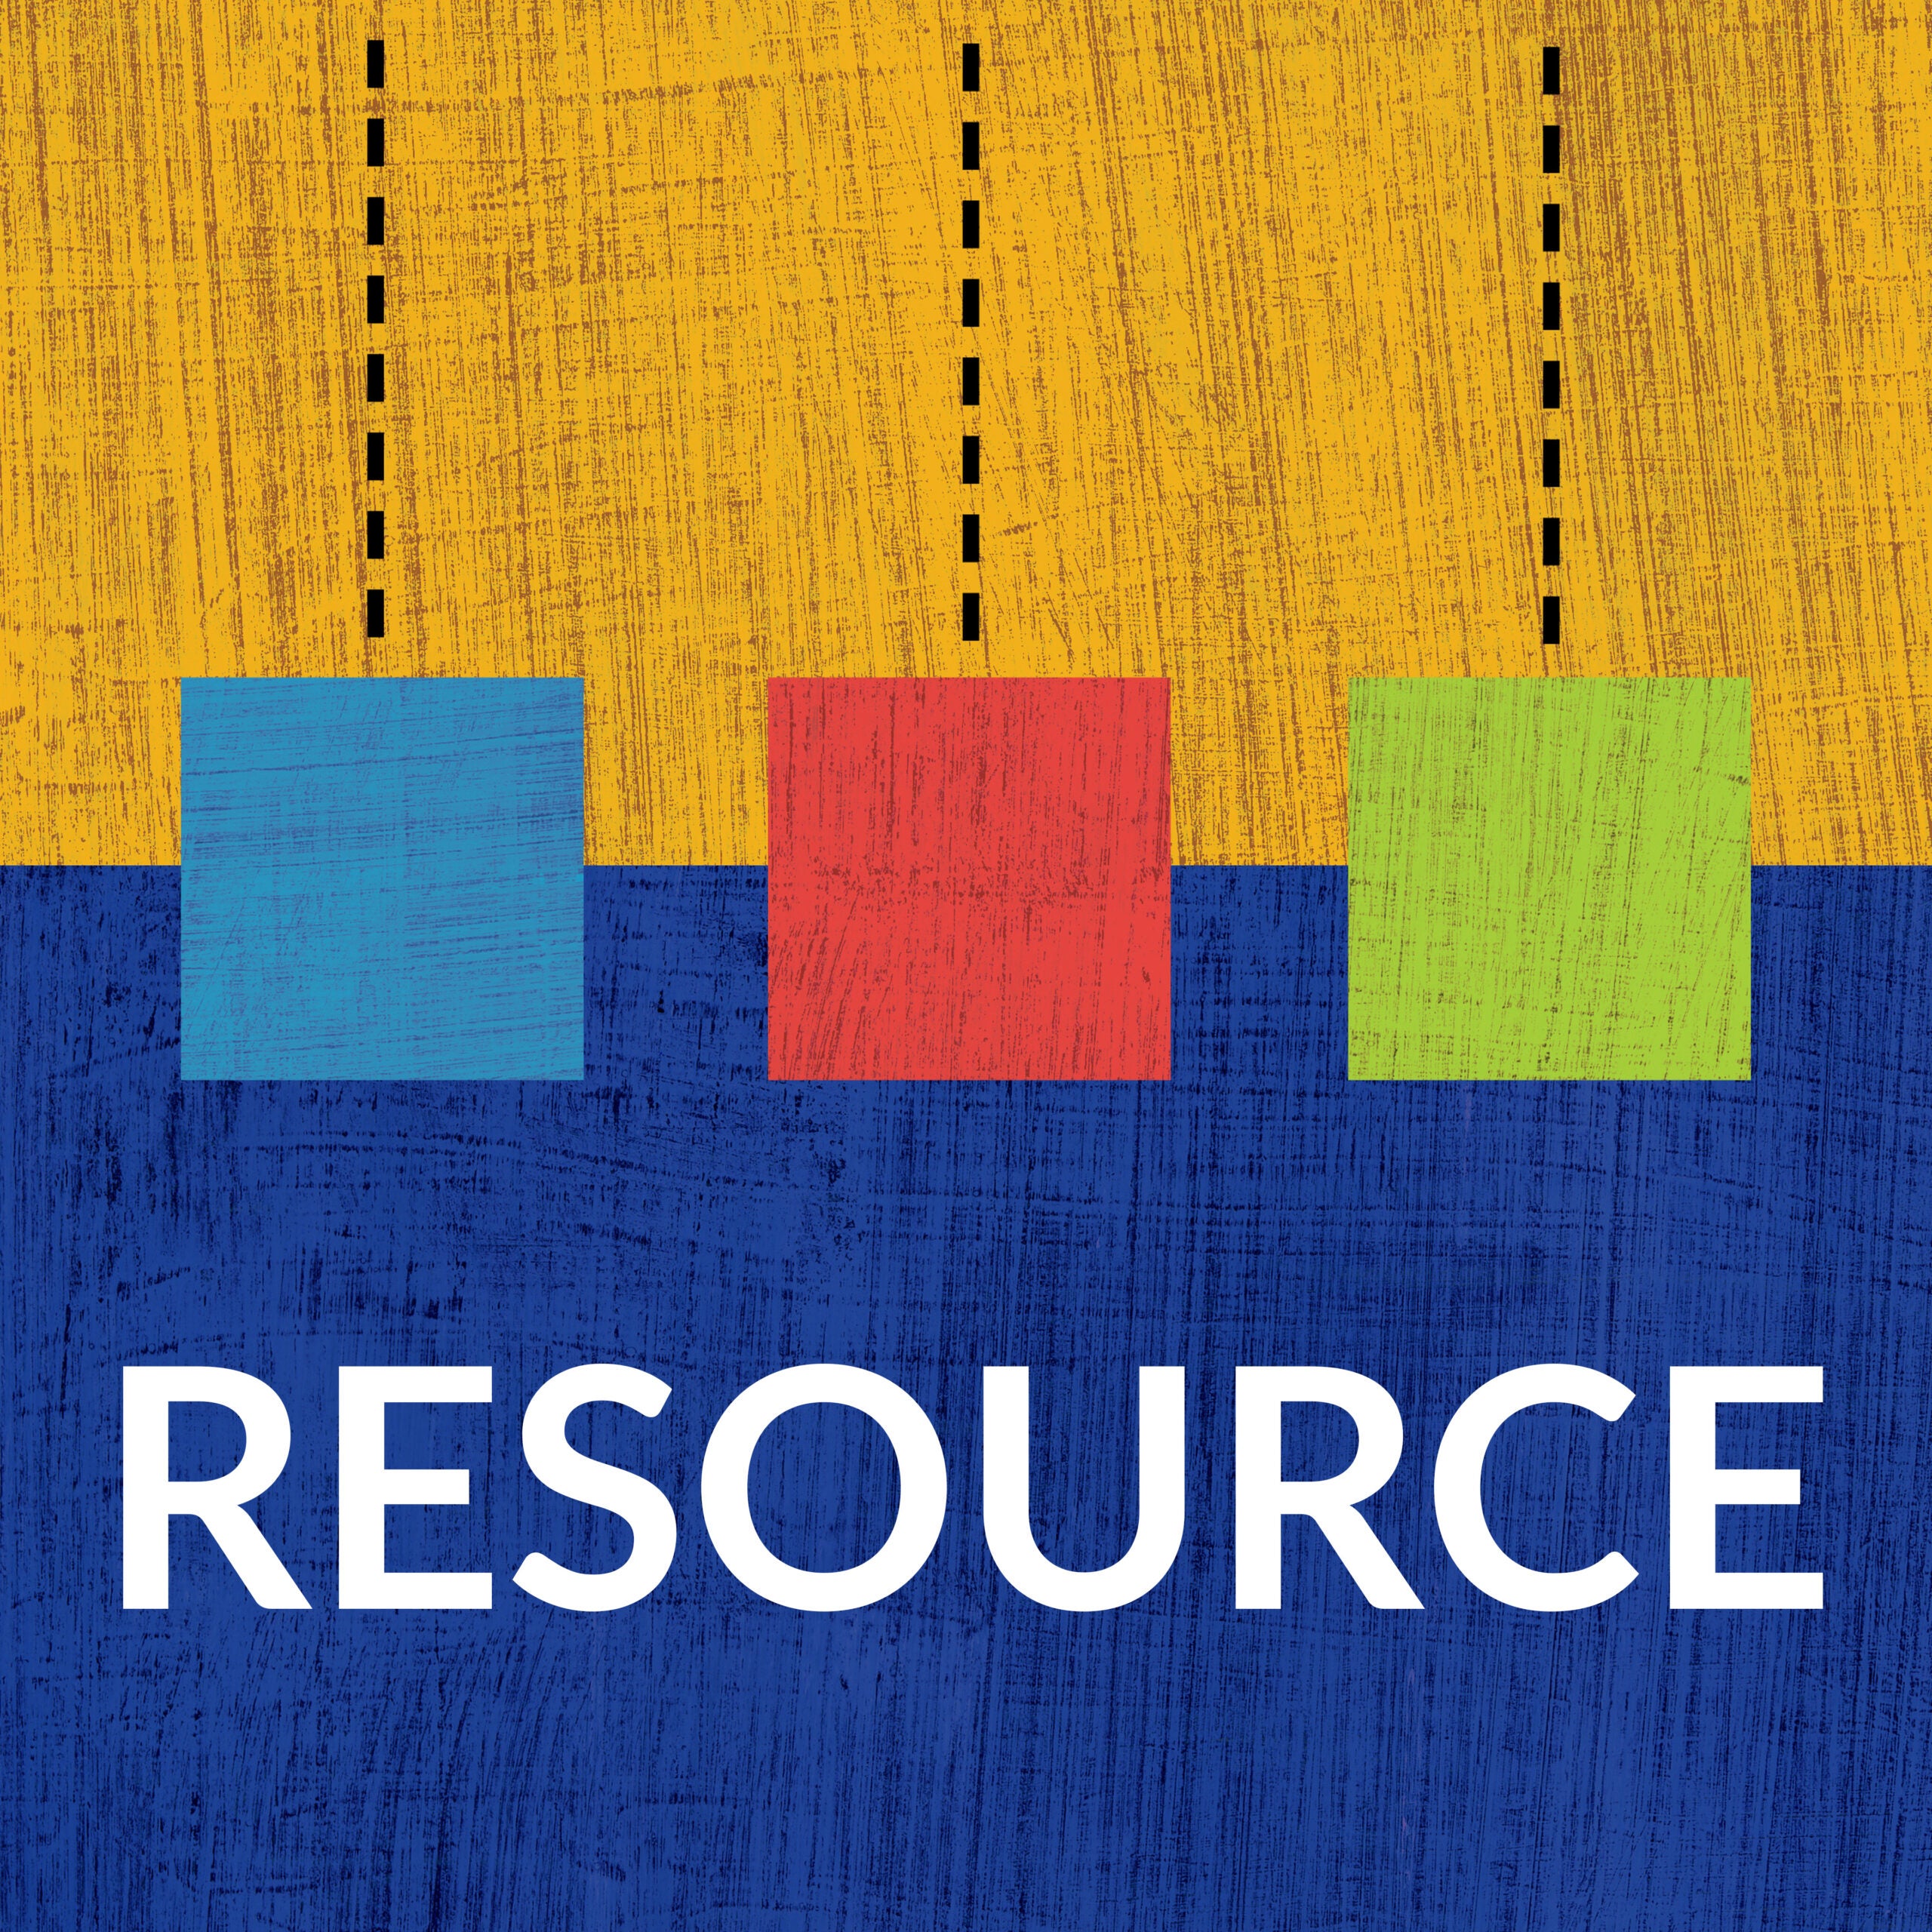 Image of Abstract Art with "Resource" Label